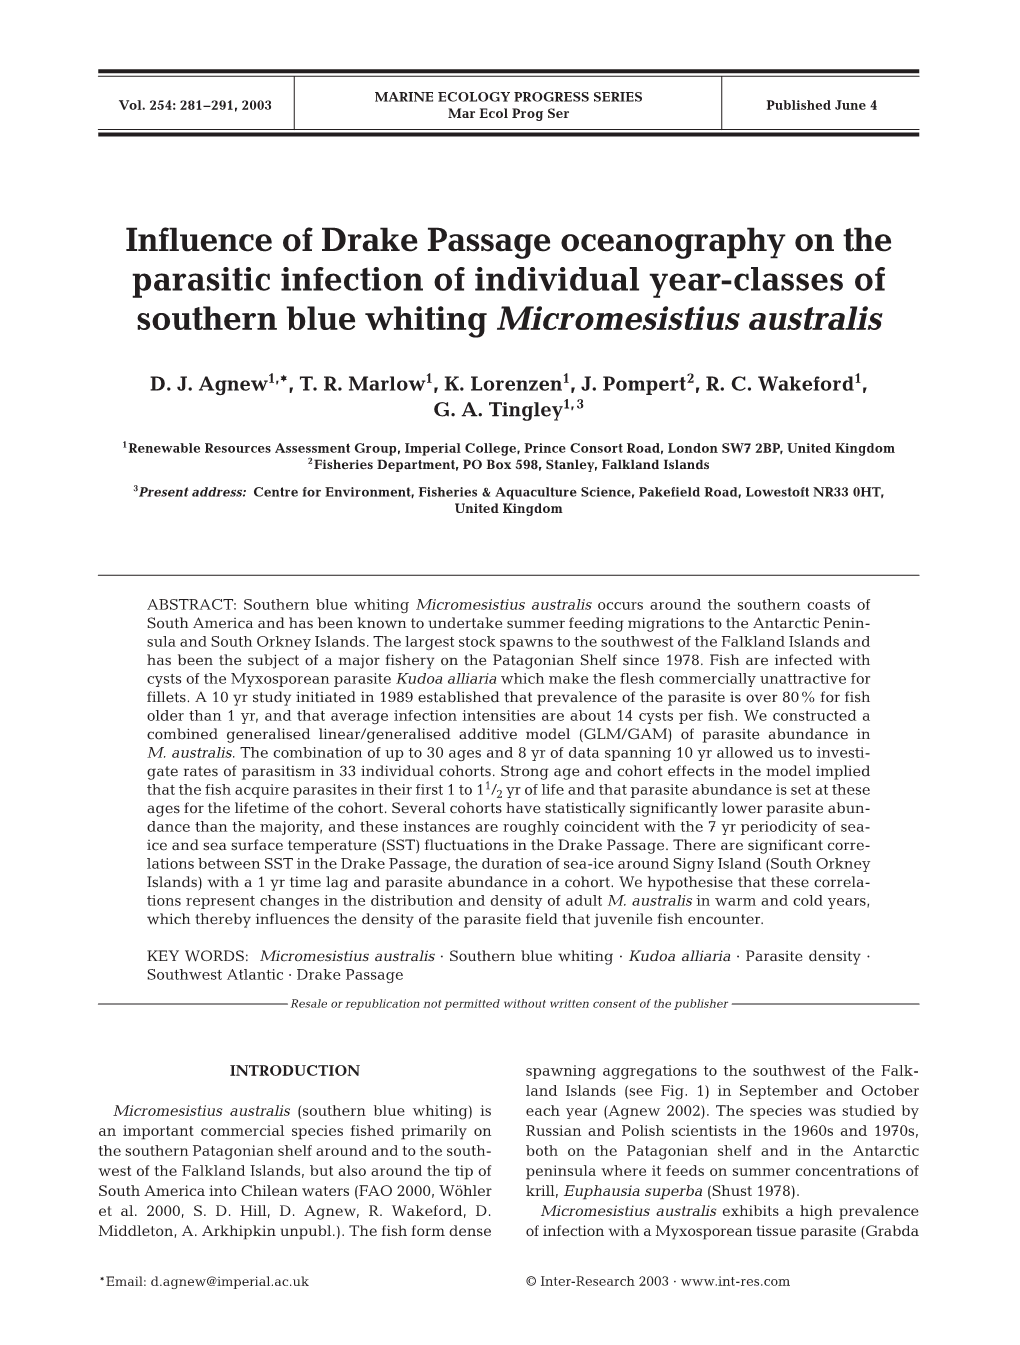 Influence of Drake Passage Oceanography on the Parasitic Infection of Individual Year-Classes of Southern Blue Whiting Micromesistius Australis